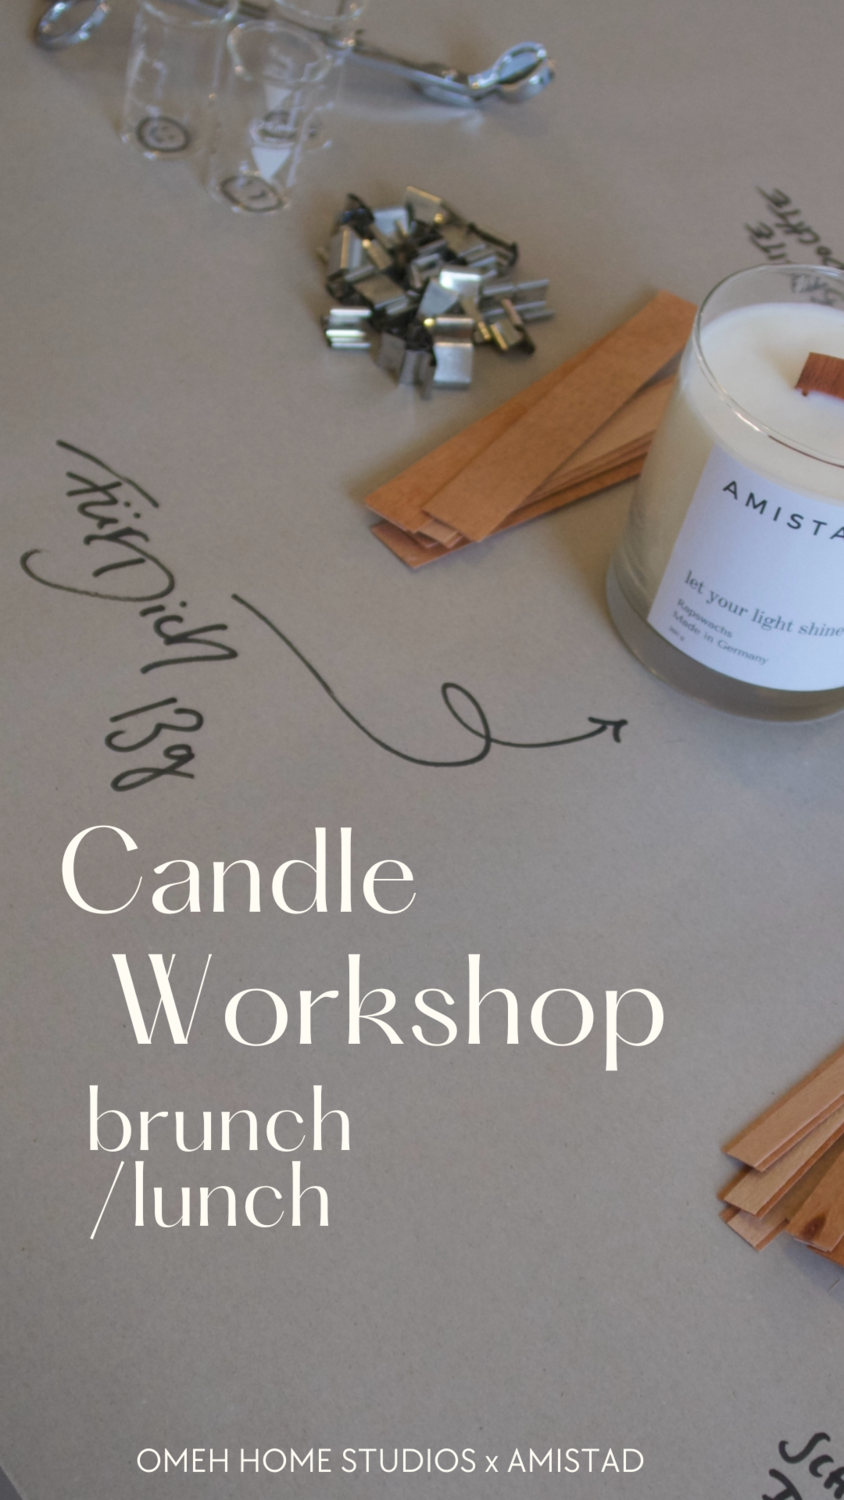 Candle Workshop with Brunch 09.04